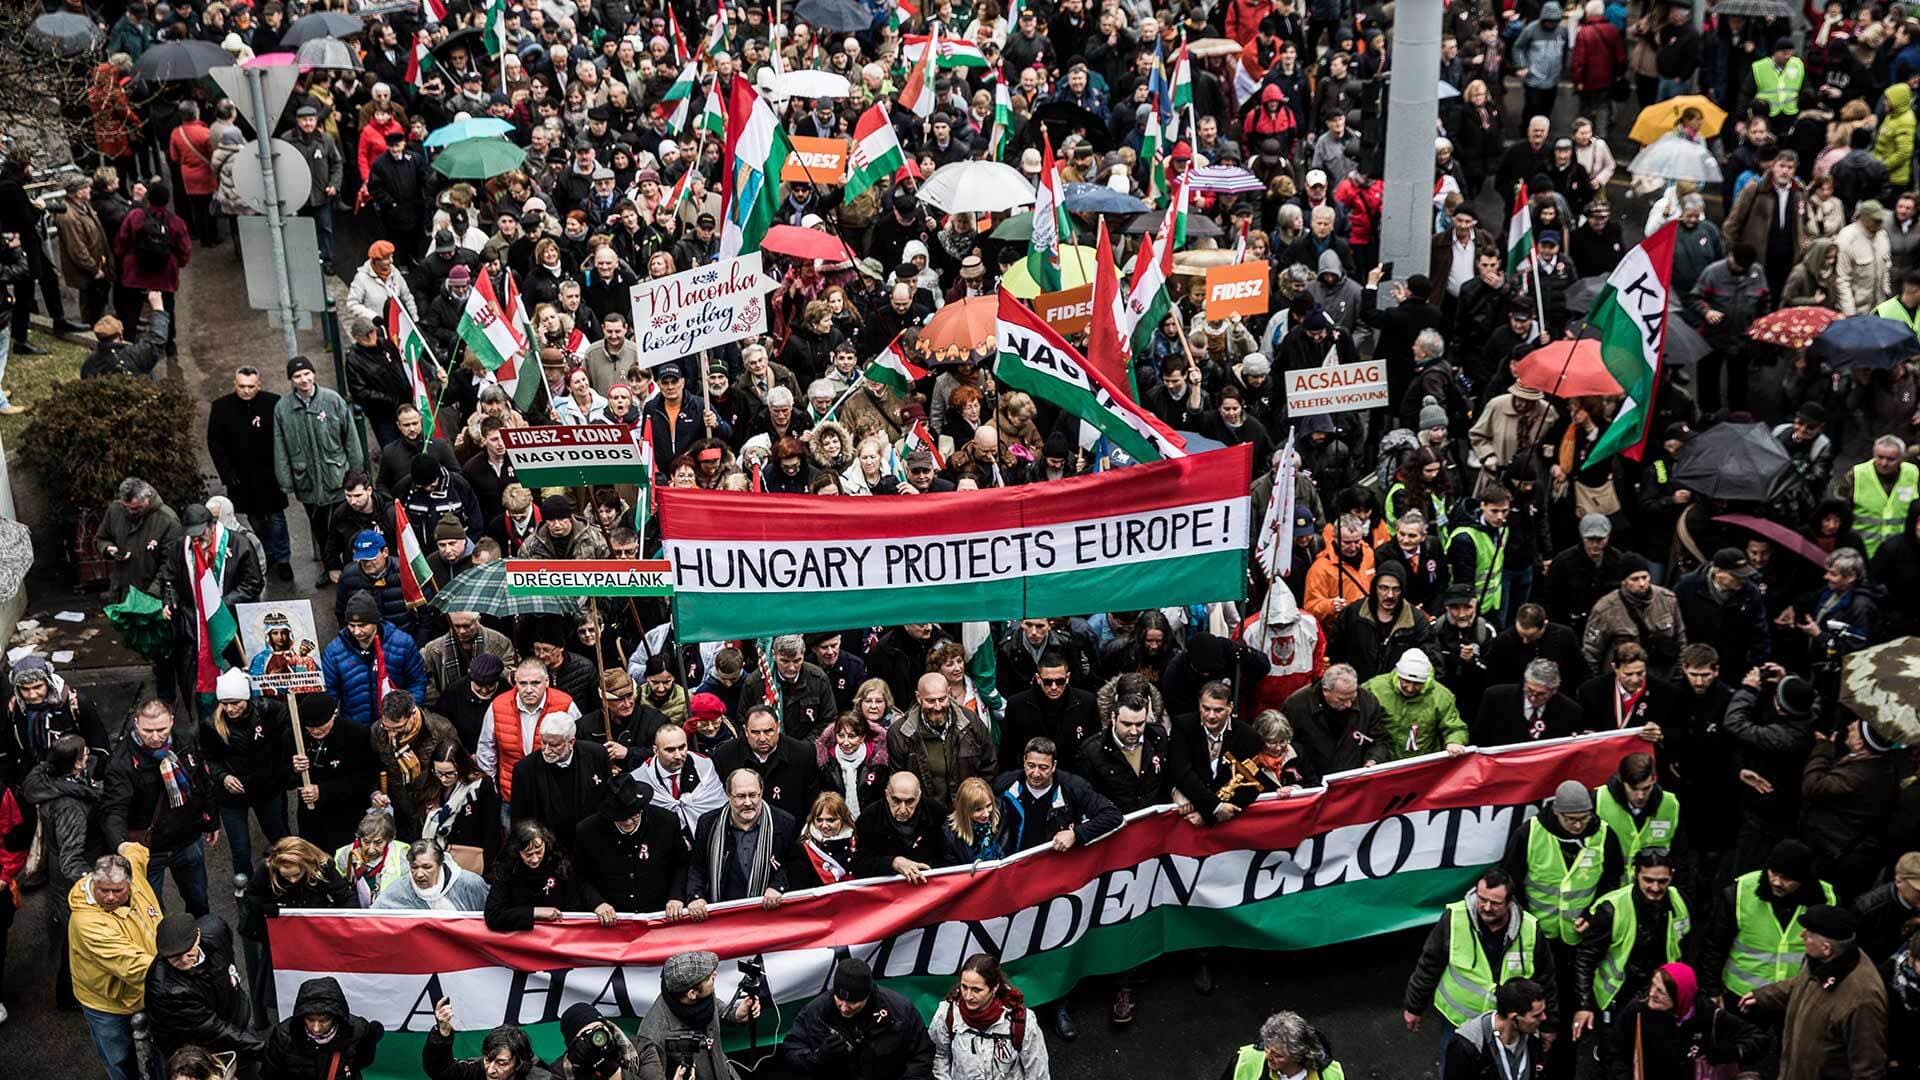 Peace march in Budapest, Hungary. Banner reads "Hungary protects Europe!"